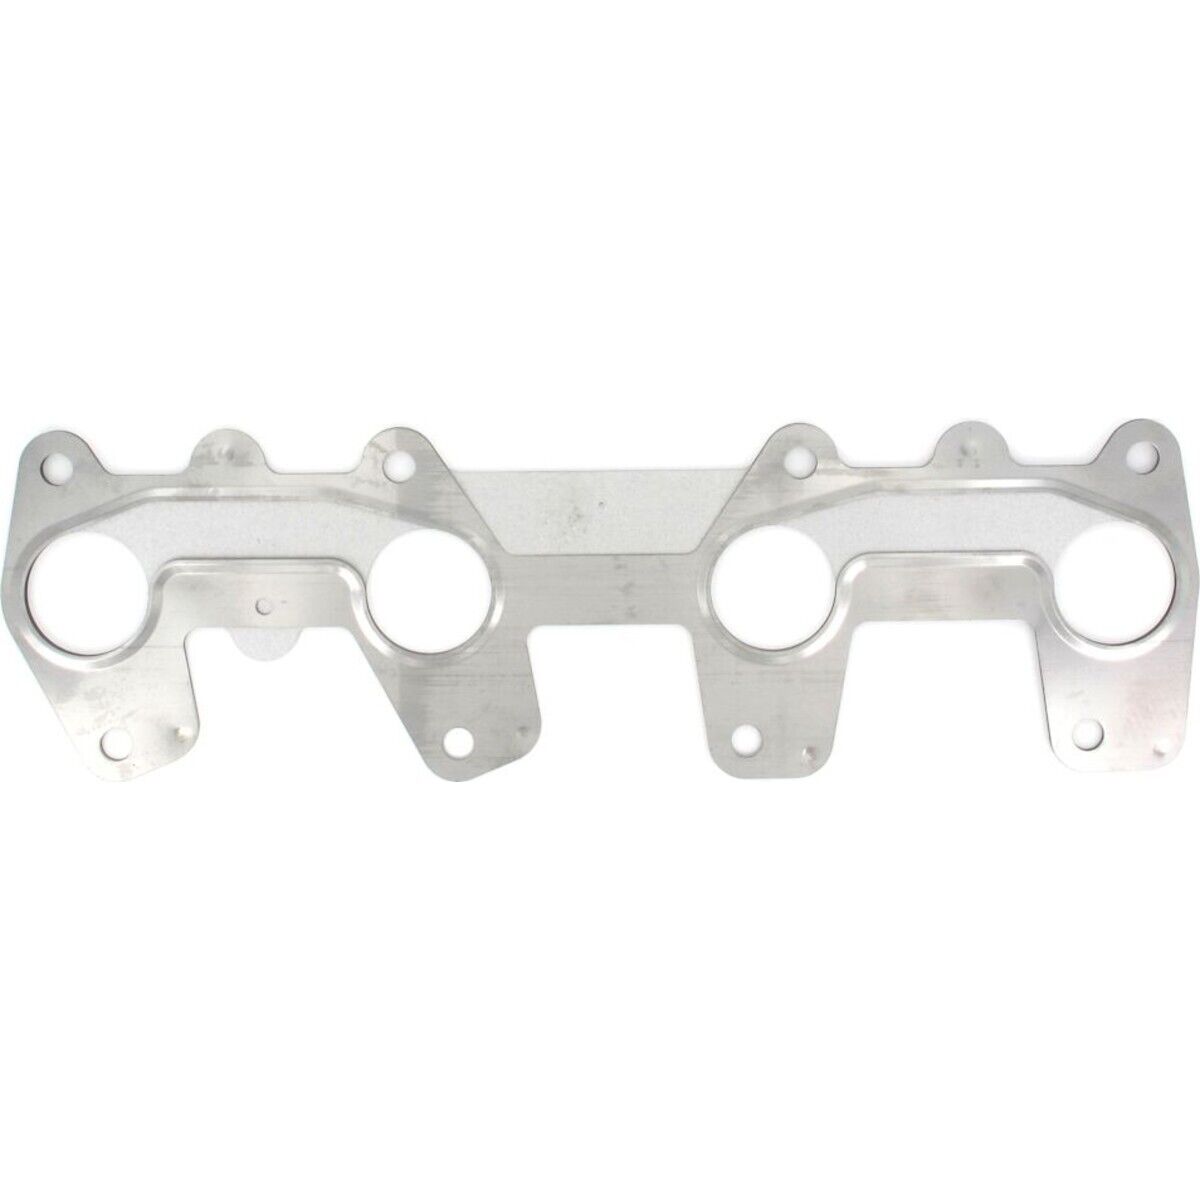 AMS3192 APEX Set Exhaust Manifold Gaskets for Chevy S10 Pickup Chevrolet S-10